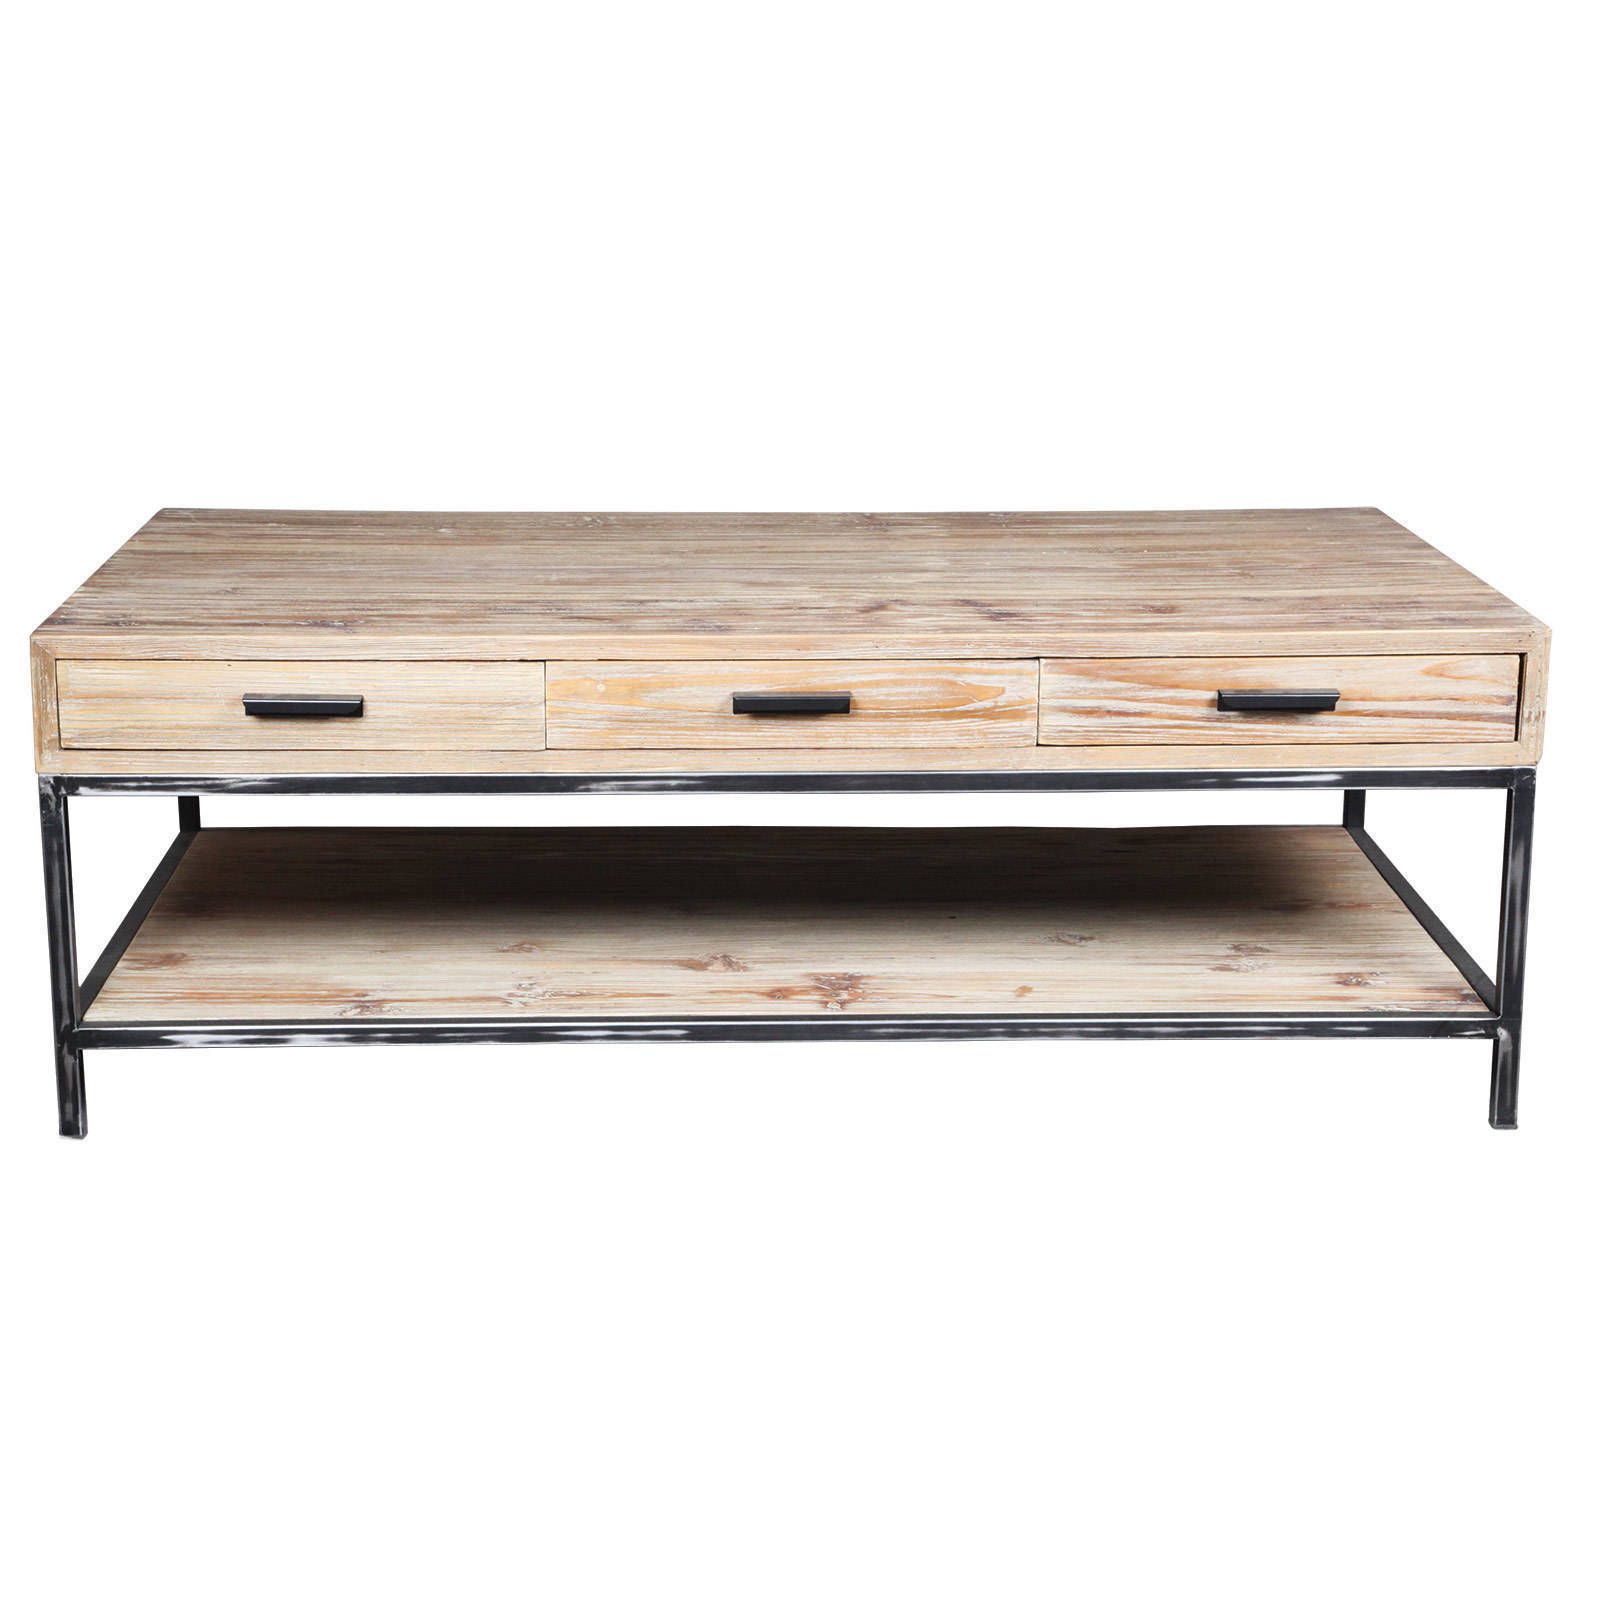 Most Recent Reclaimed Pine & Iron Coffee Tables With Regard To Shop Reclaimed Pine Wood And Iron Coffee Table – Free Shipping Today (View 4 of 20)